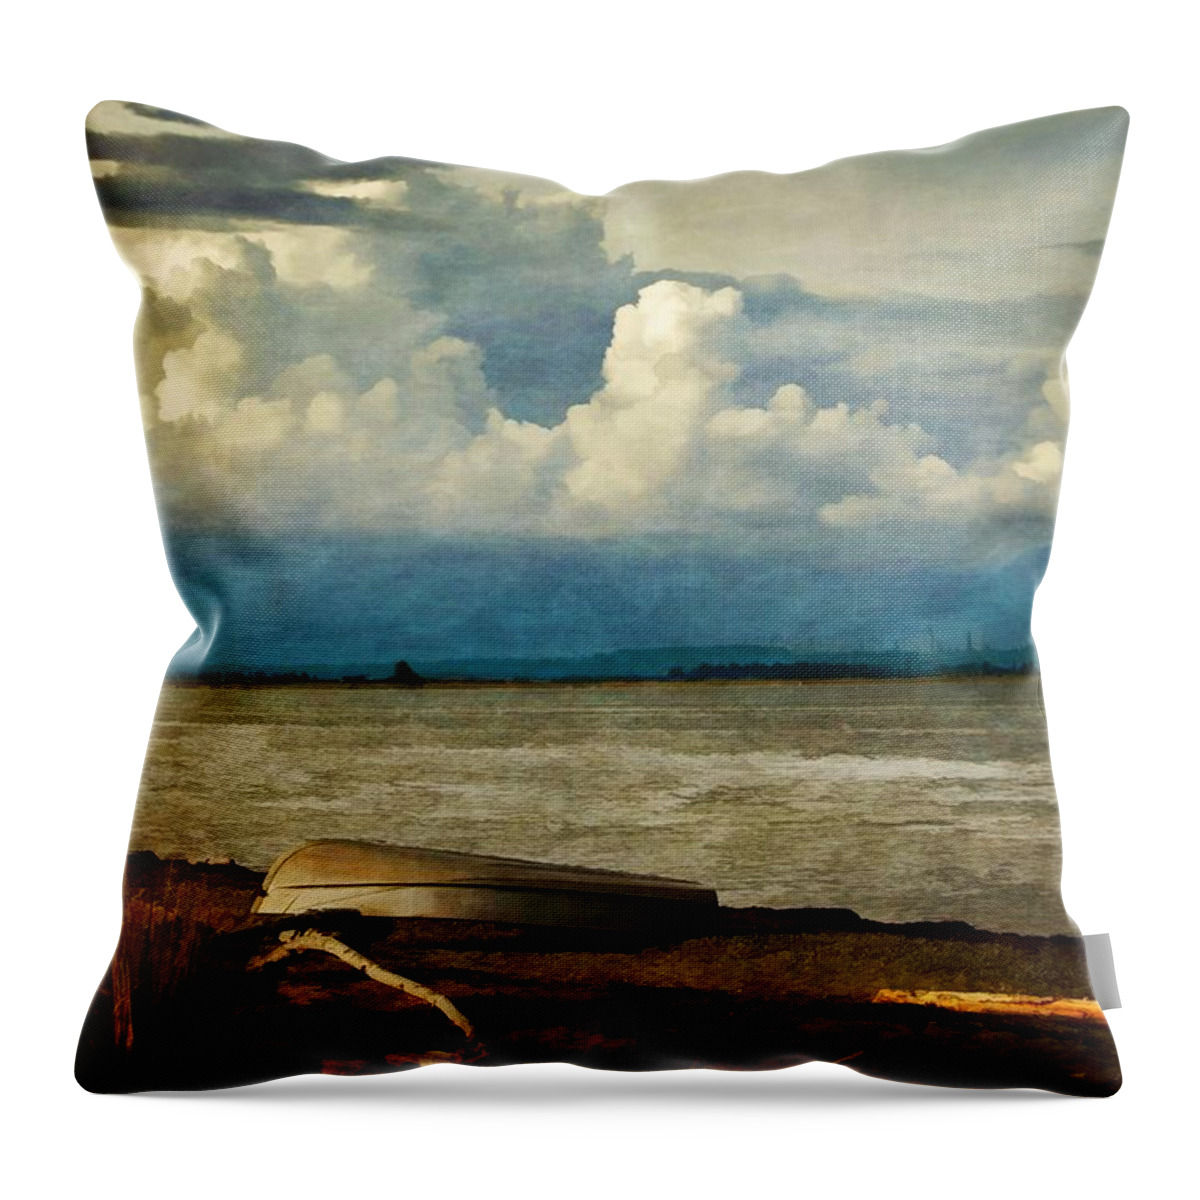 Serenity Throw Pillow featuring the painting Serenity by Jordan Blackstone